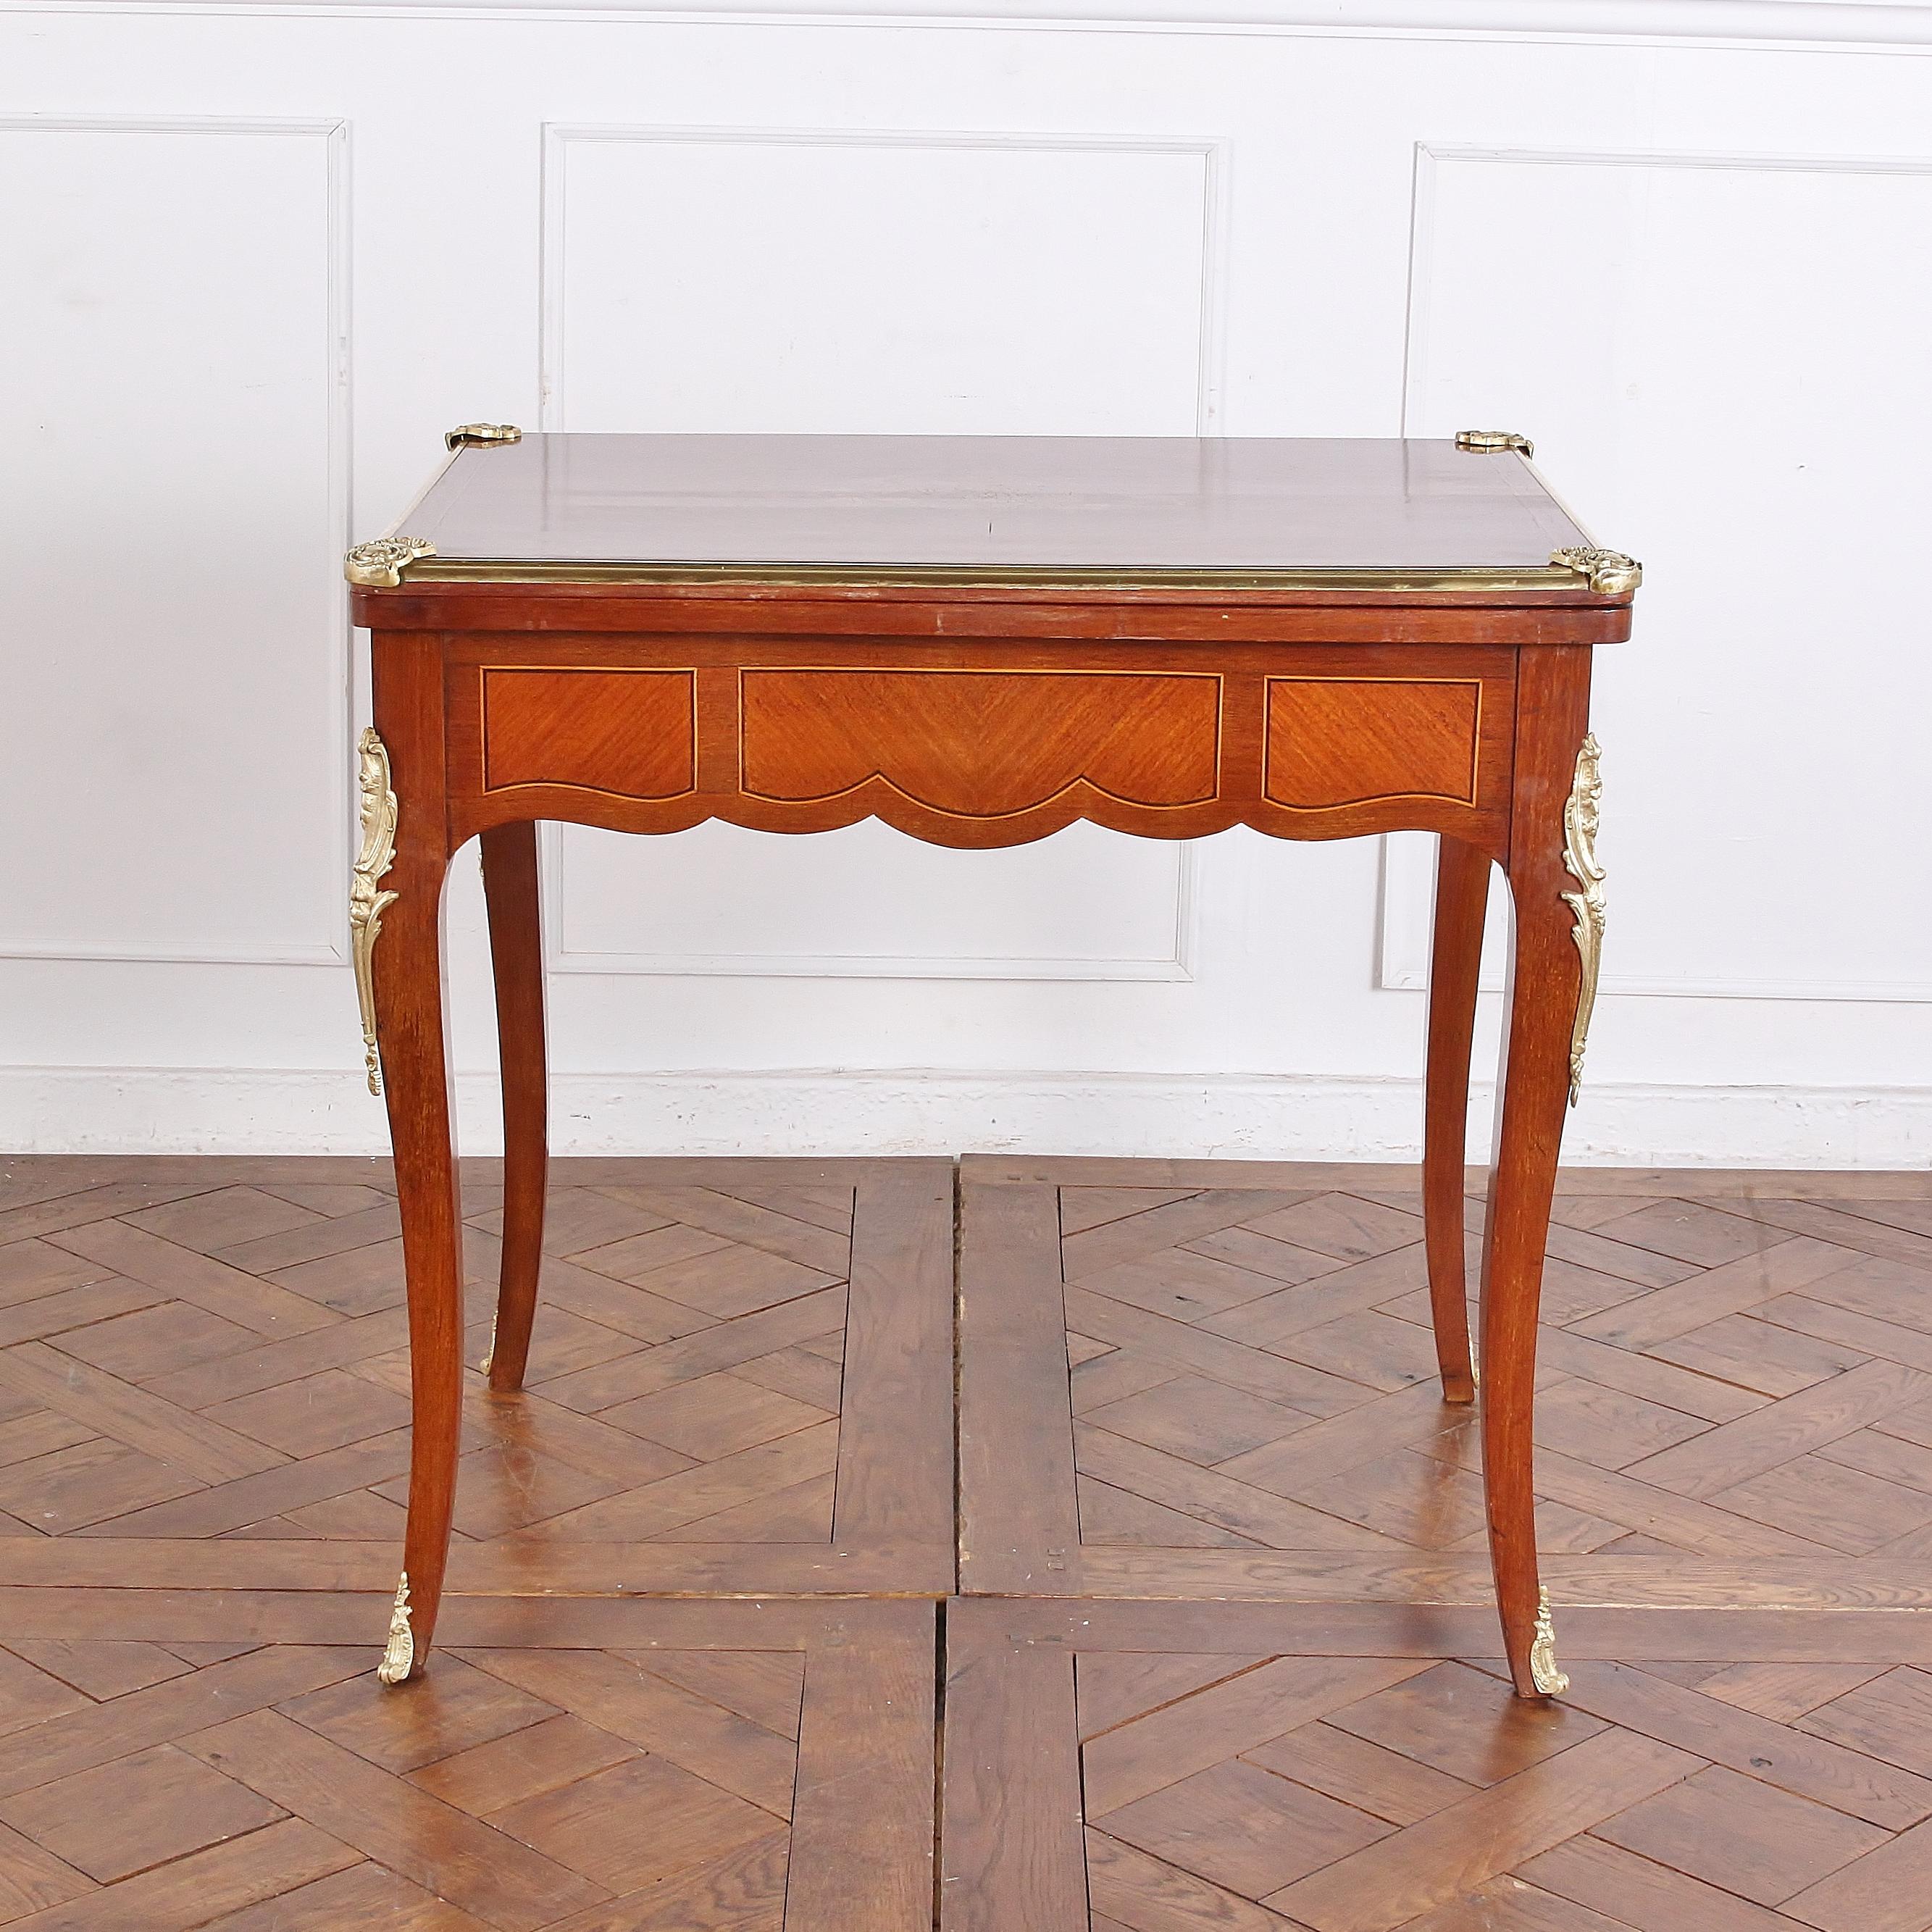 French, inlaid kingwood, Louis XV style ‘flip-top’ games table, with ormolu mounts and edging around top surface. The top opens to become a large felt playing surface. A drawer in one end provides convenient storage for cards and gaming pieces, and